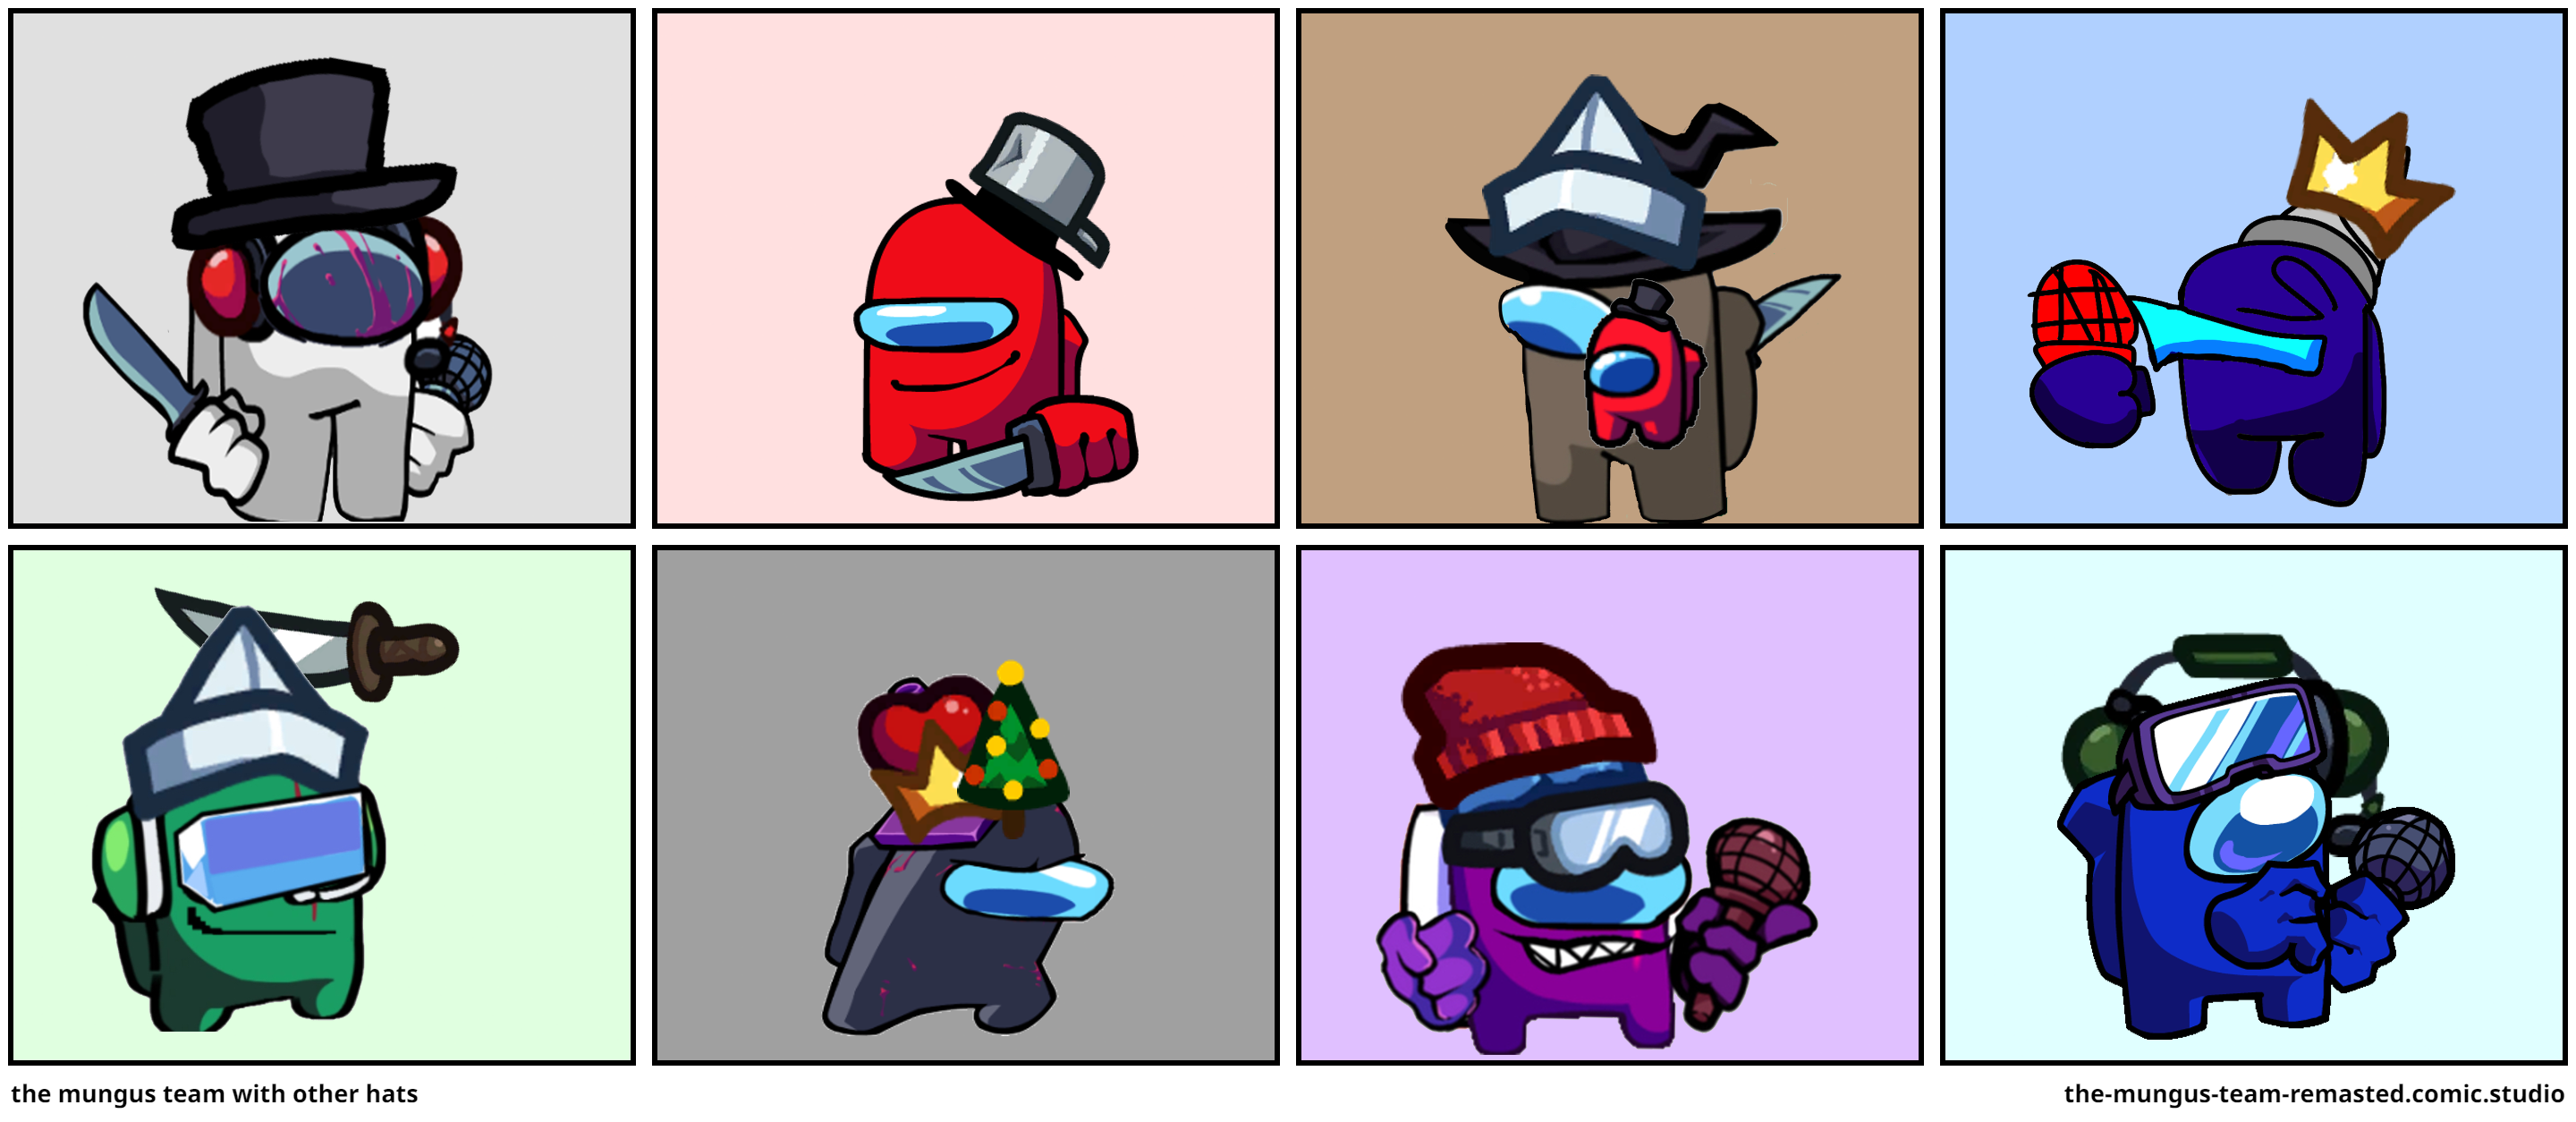 the mungus team with other hats